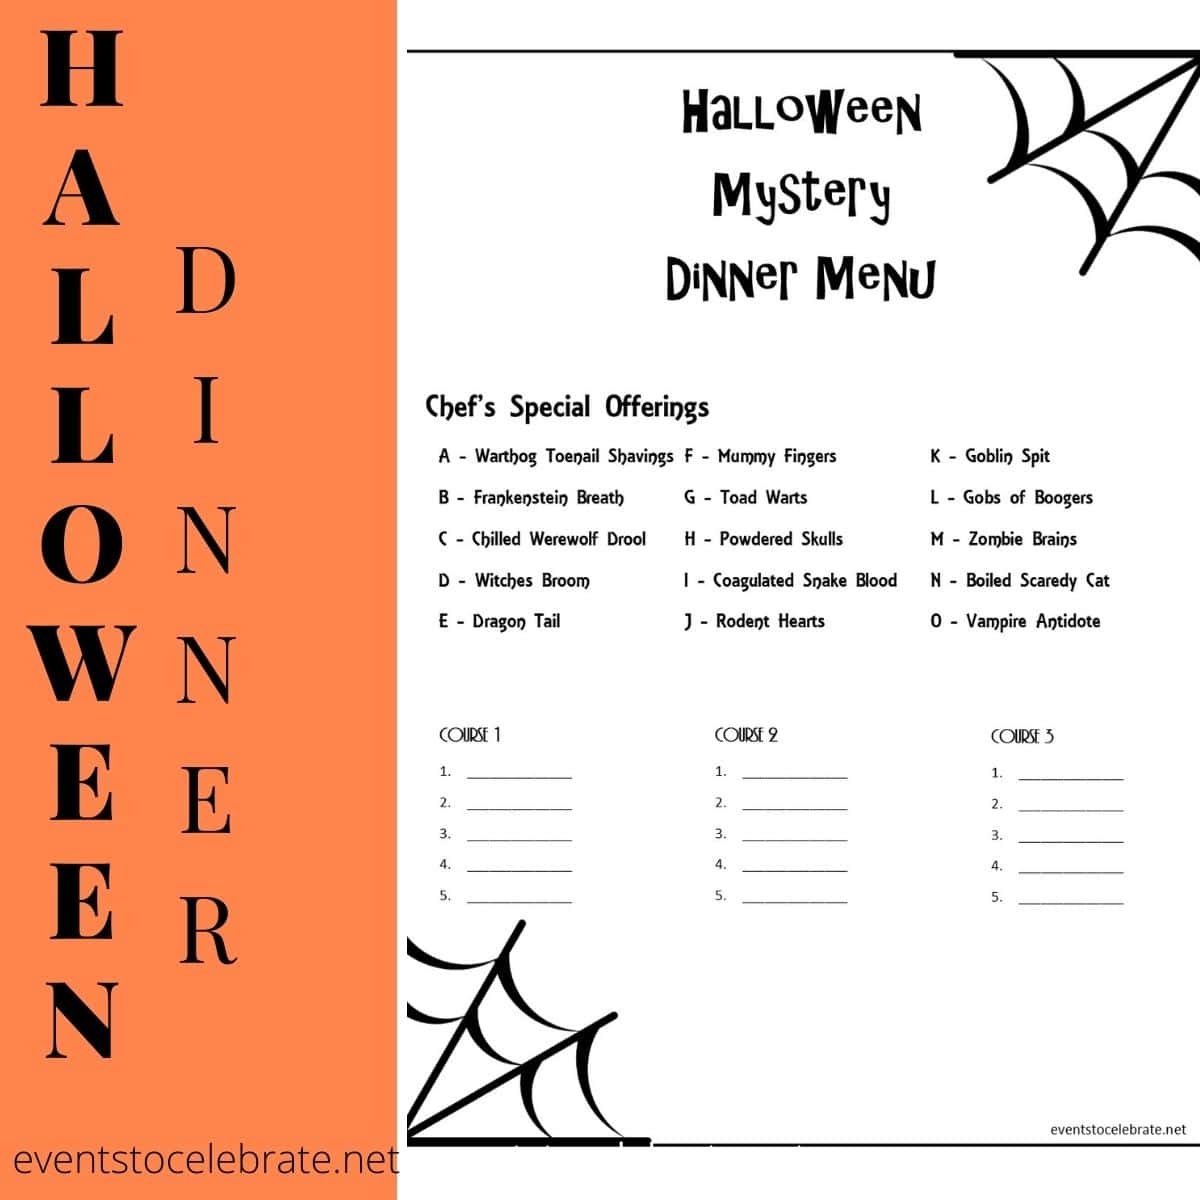 Halloween Mystery Dinner Menu Party Ideas For Real People